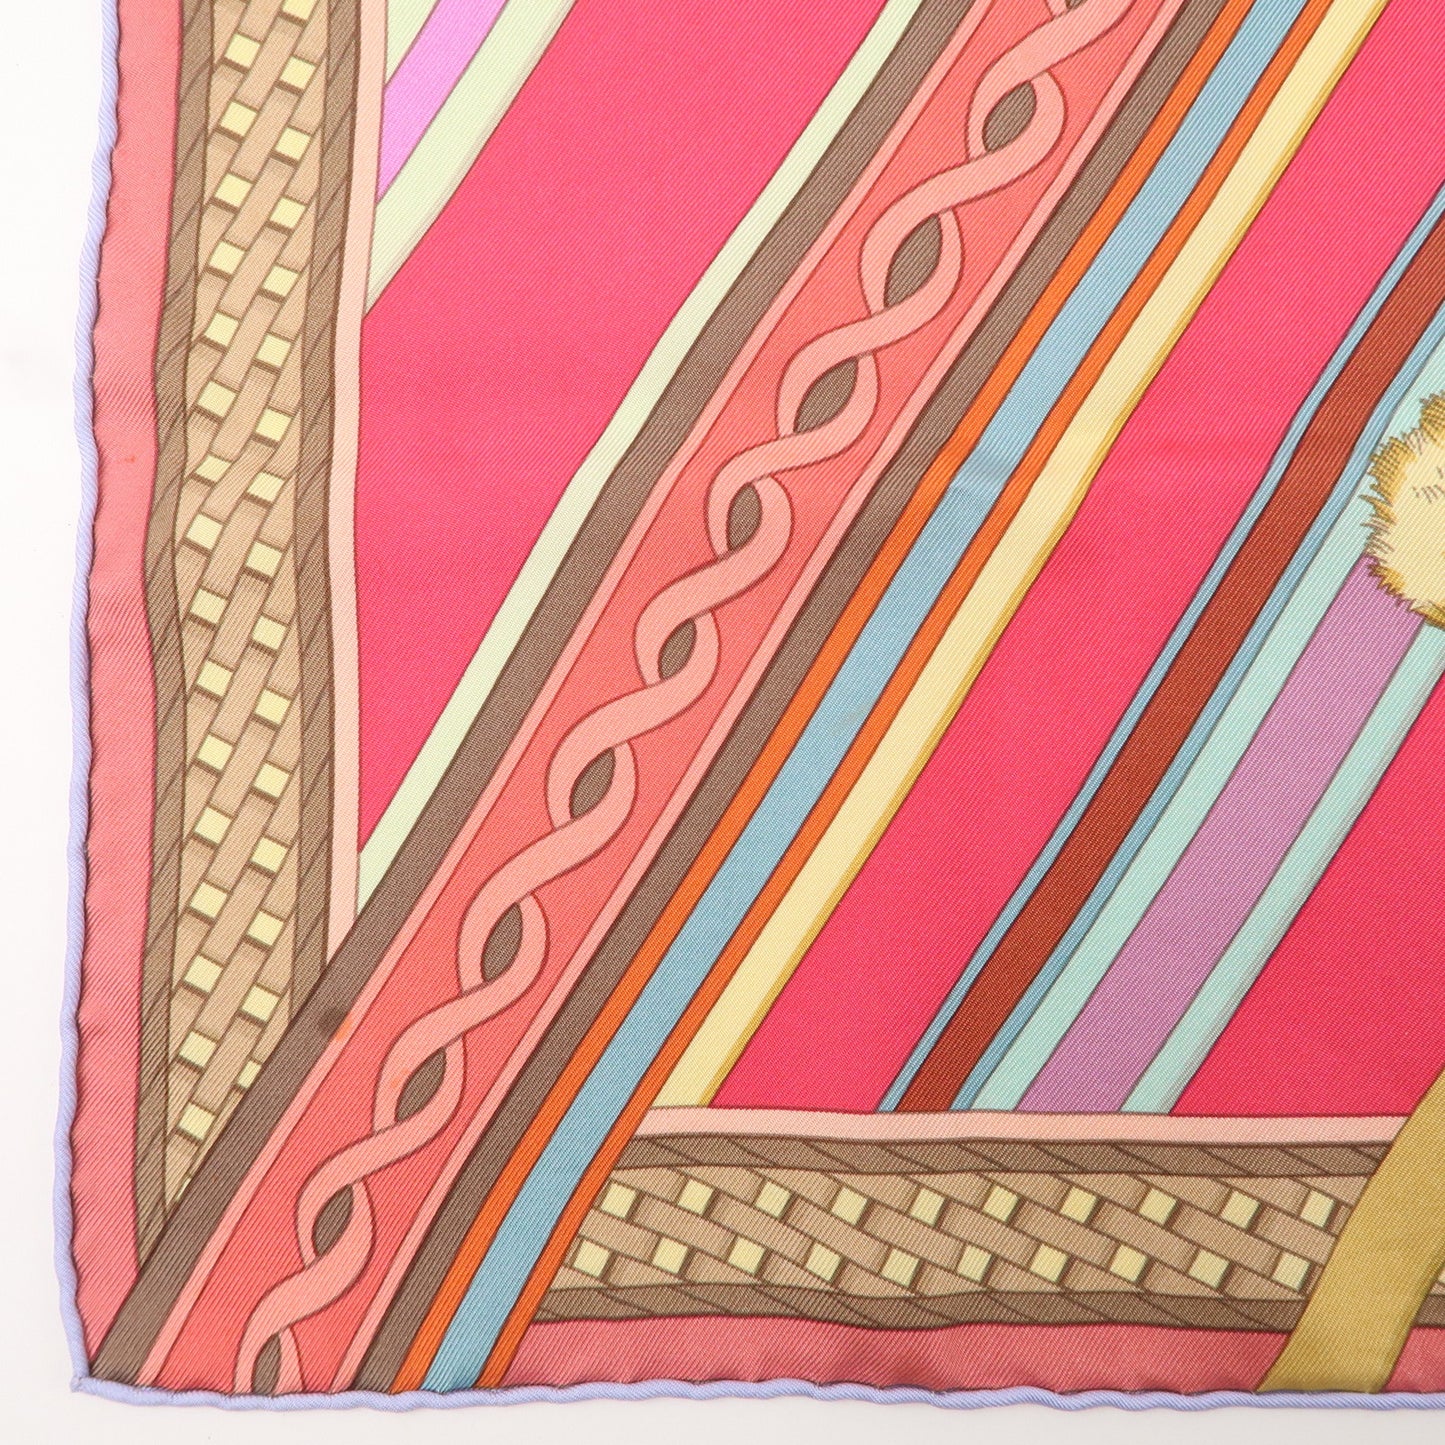 HERMES Carre 90 Silk 100% Scarf CONCOURS DETRIERS Pink